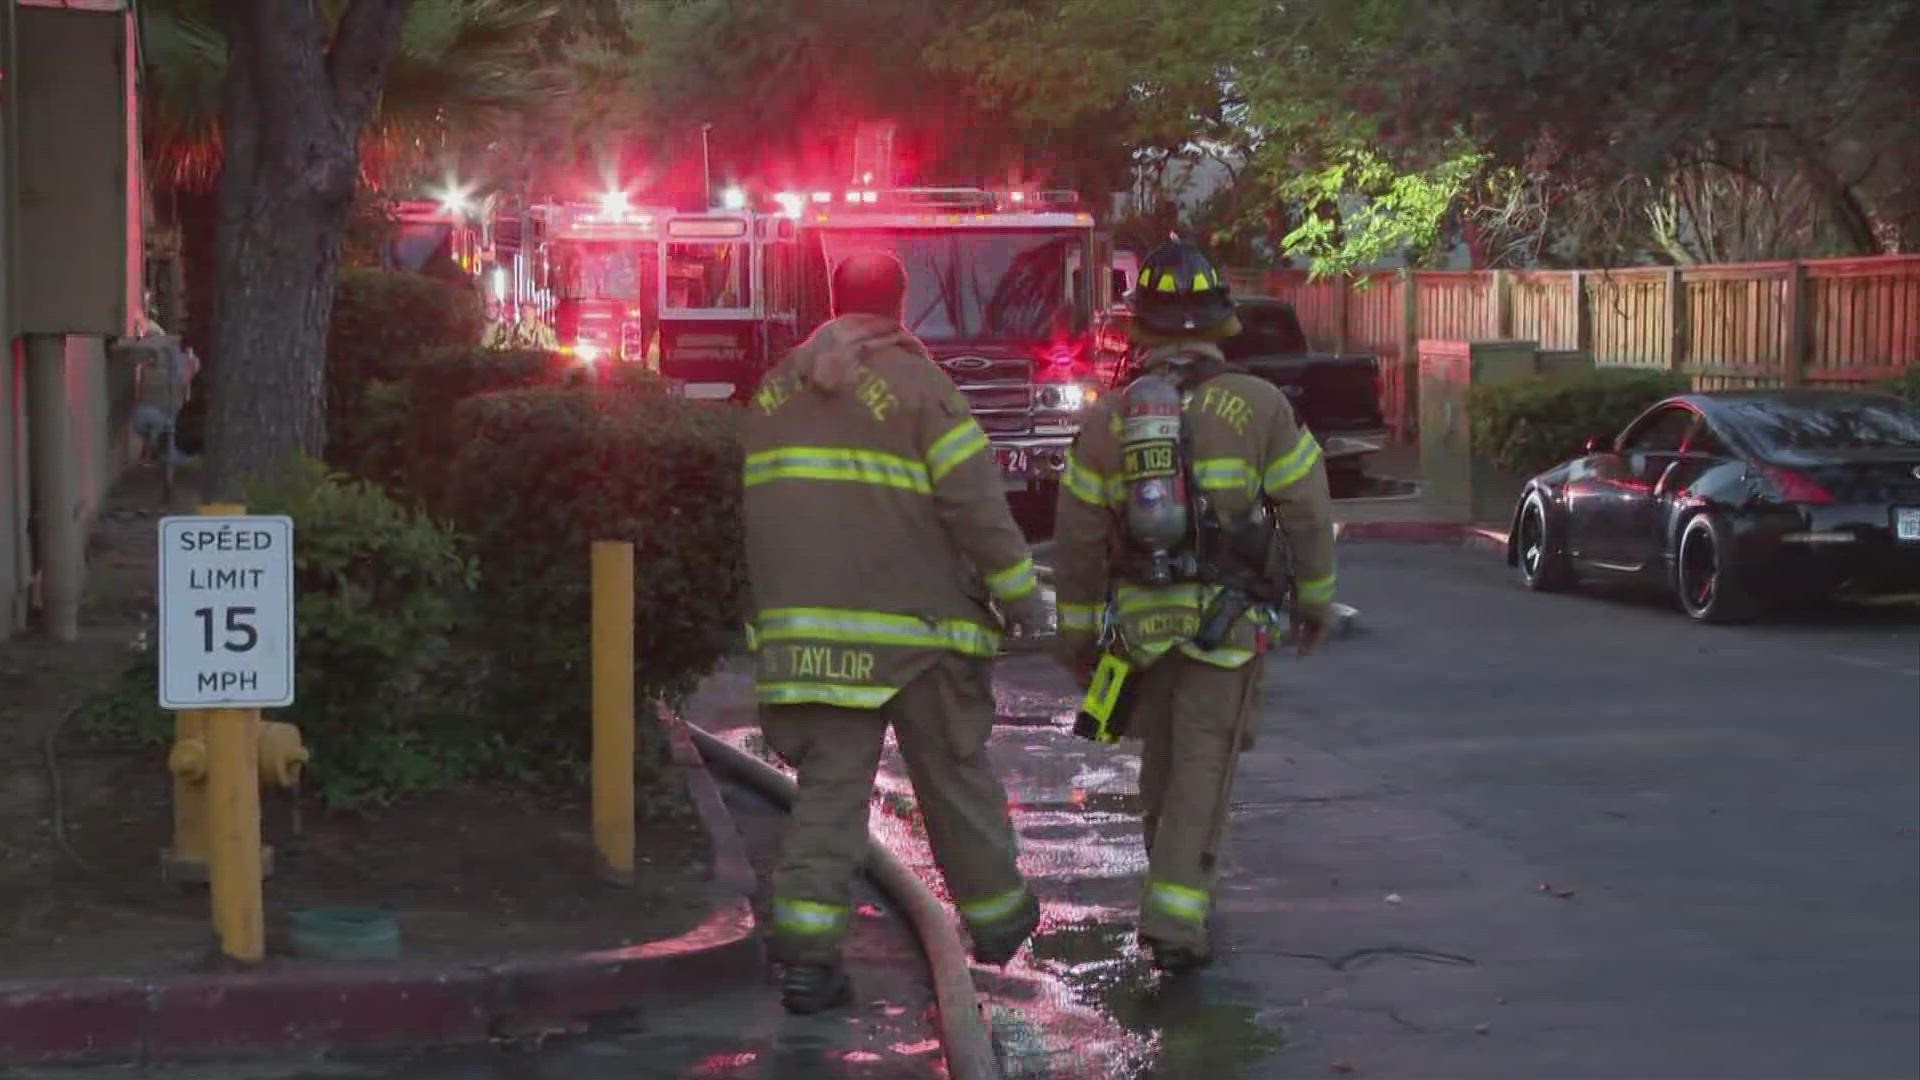 There were multiple rescues from an apartment fire in North Highlands on Friday morning, according to the Sacramento Metropolitan Fire District.